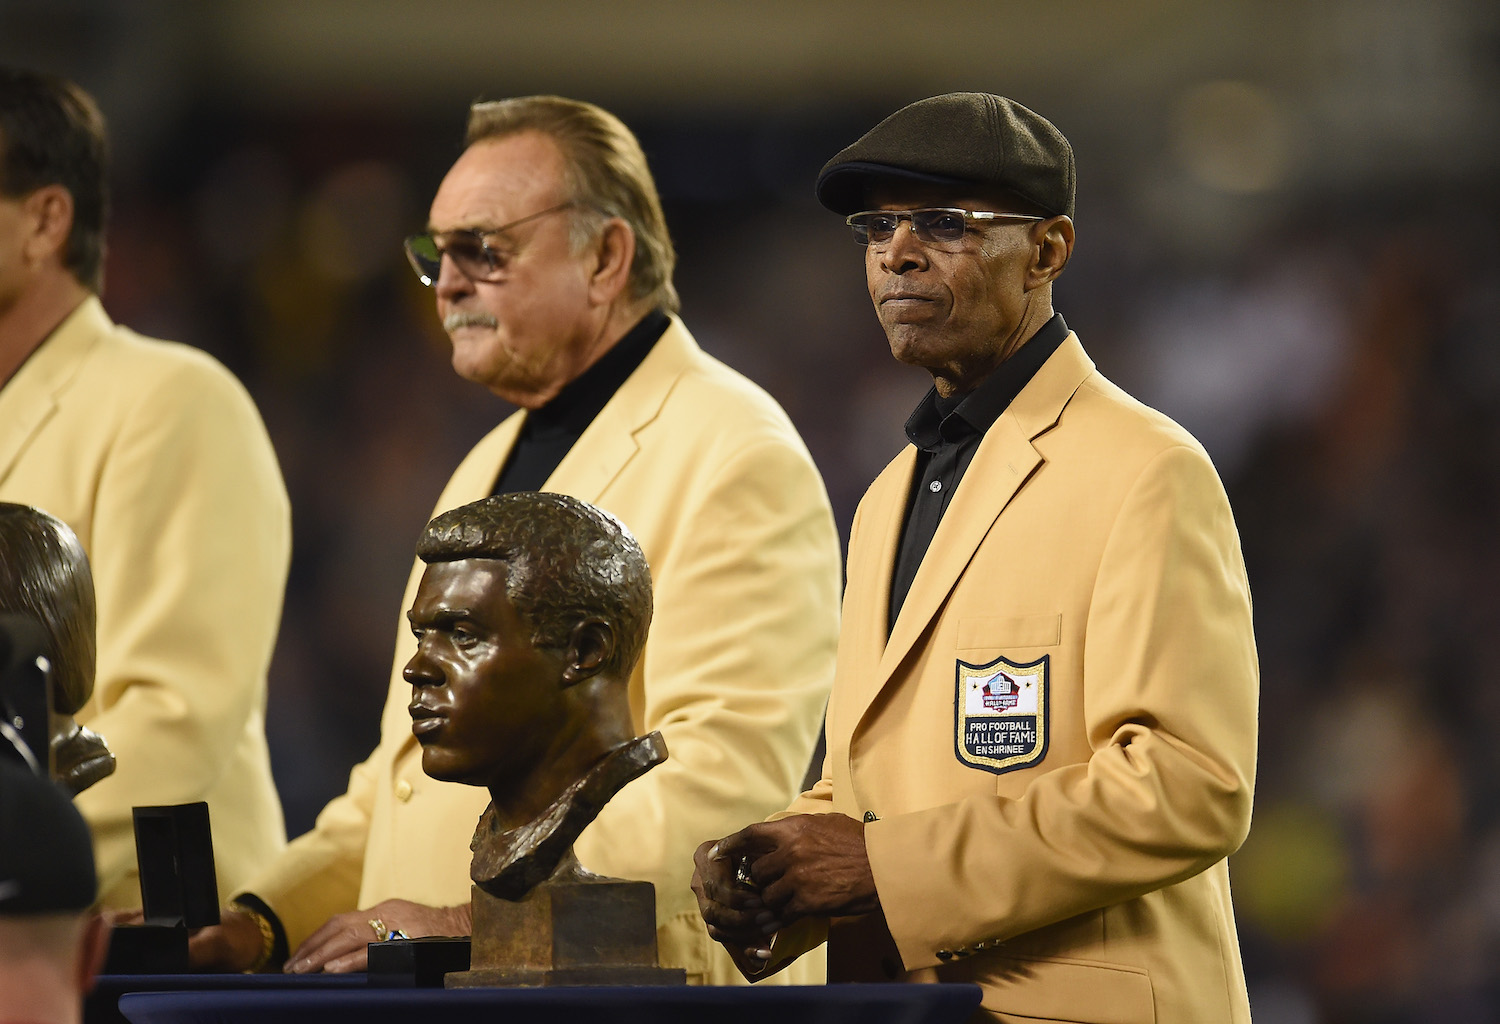 Gale Sayers is one of the greatest NFL players of all time, but he's been battling dementia since his diagnosis in 2017.